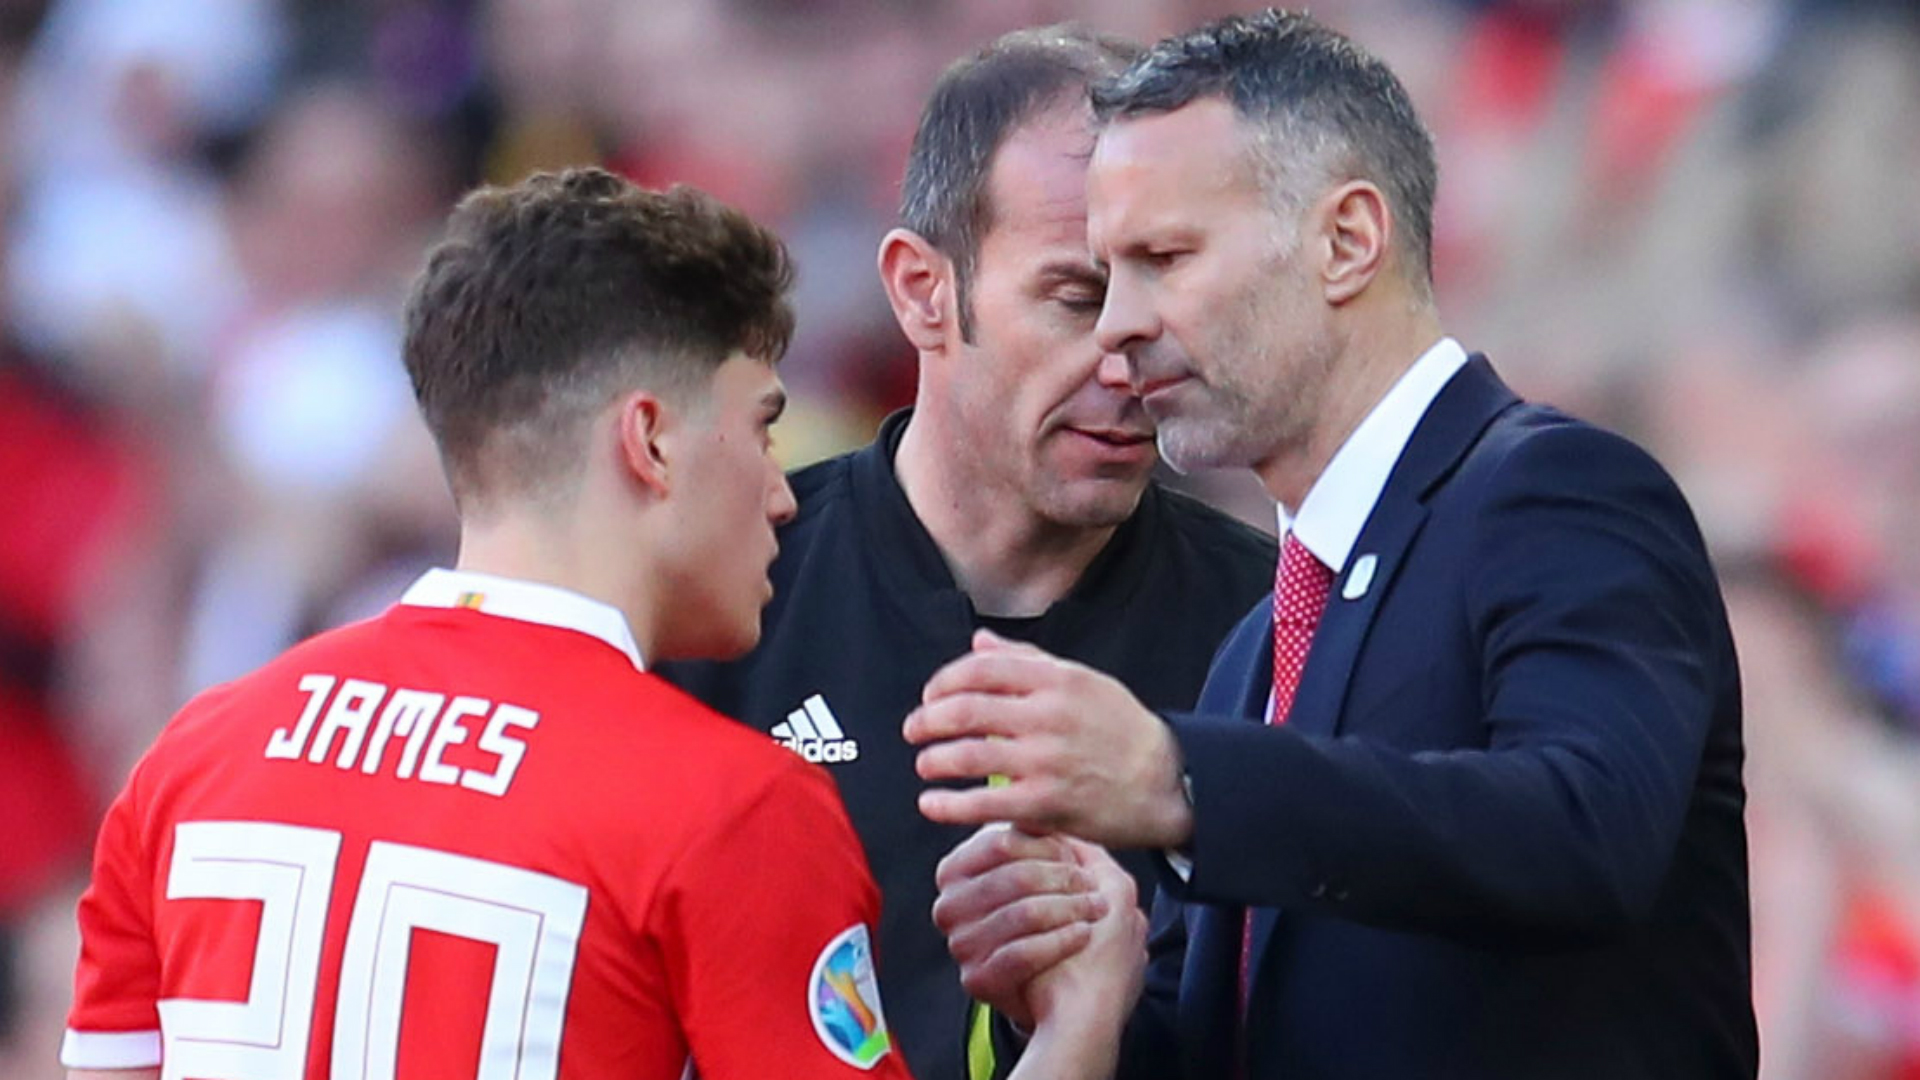 Giggs Tells James To Enjoy The Challenge - Ryan Giggs And Daniel James - HD Wallpaper 